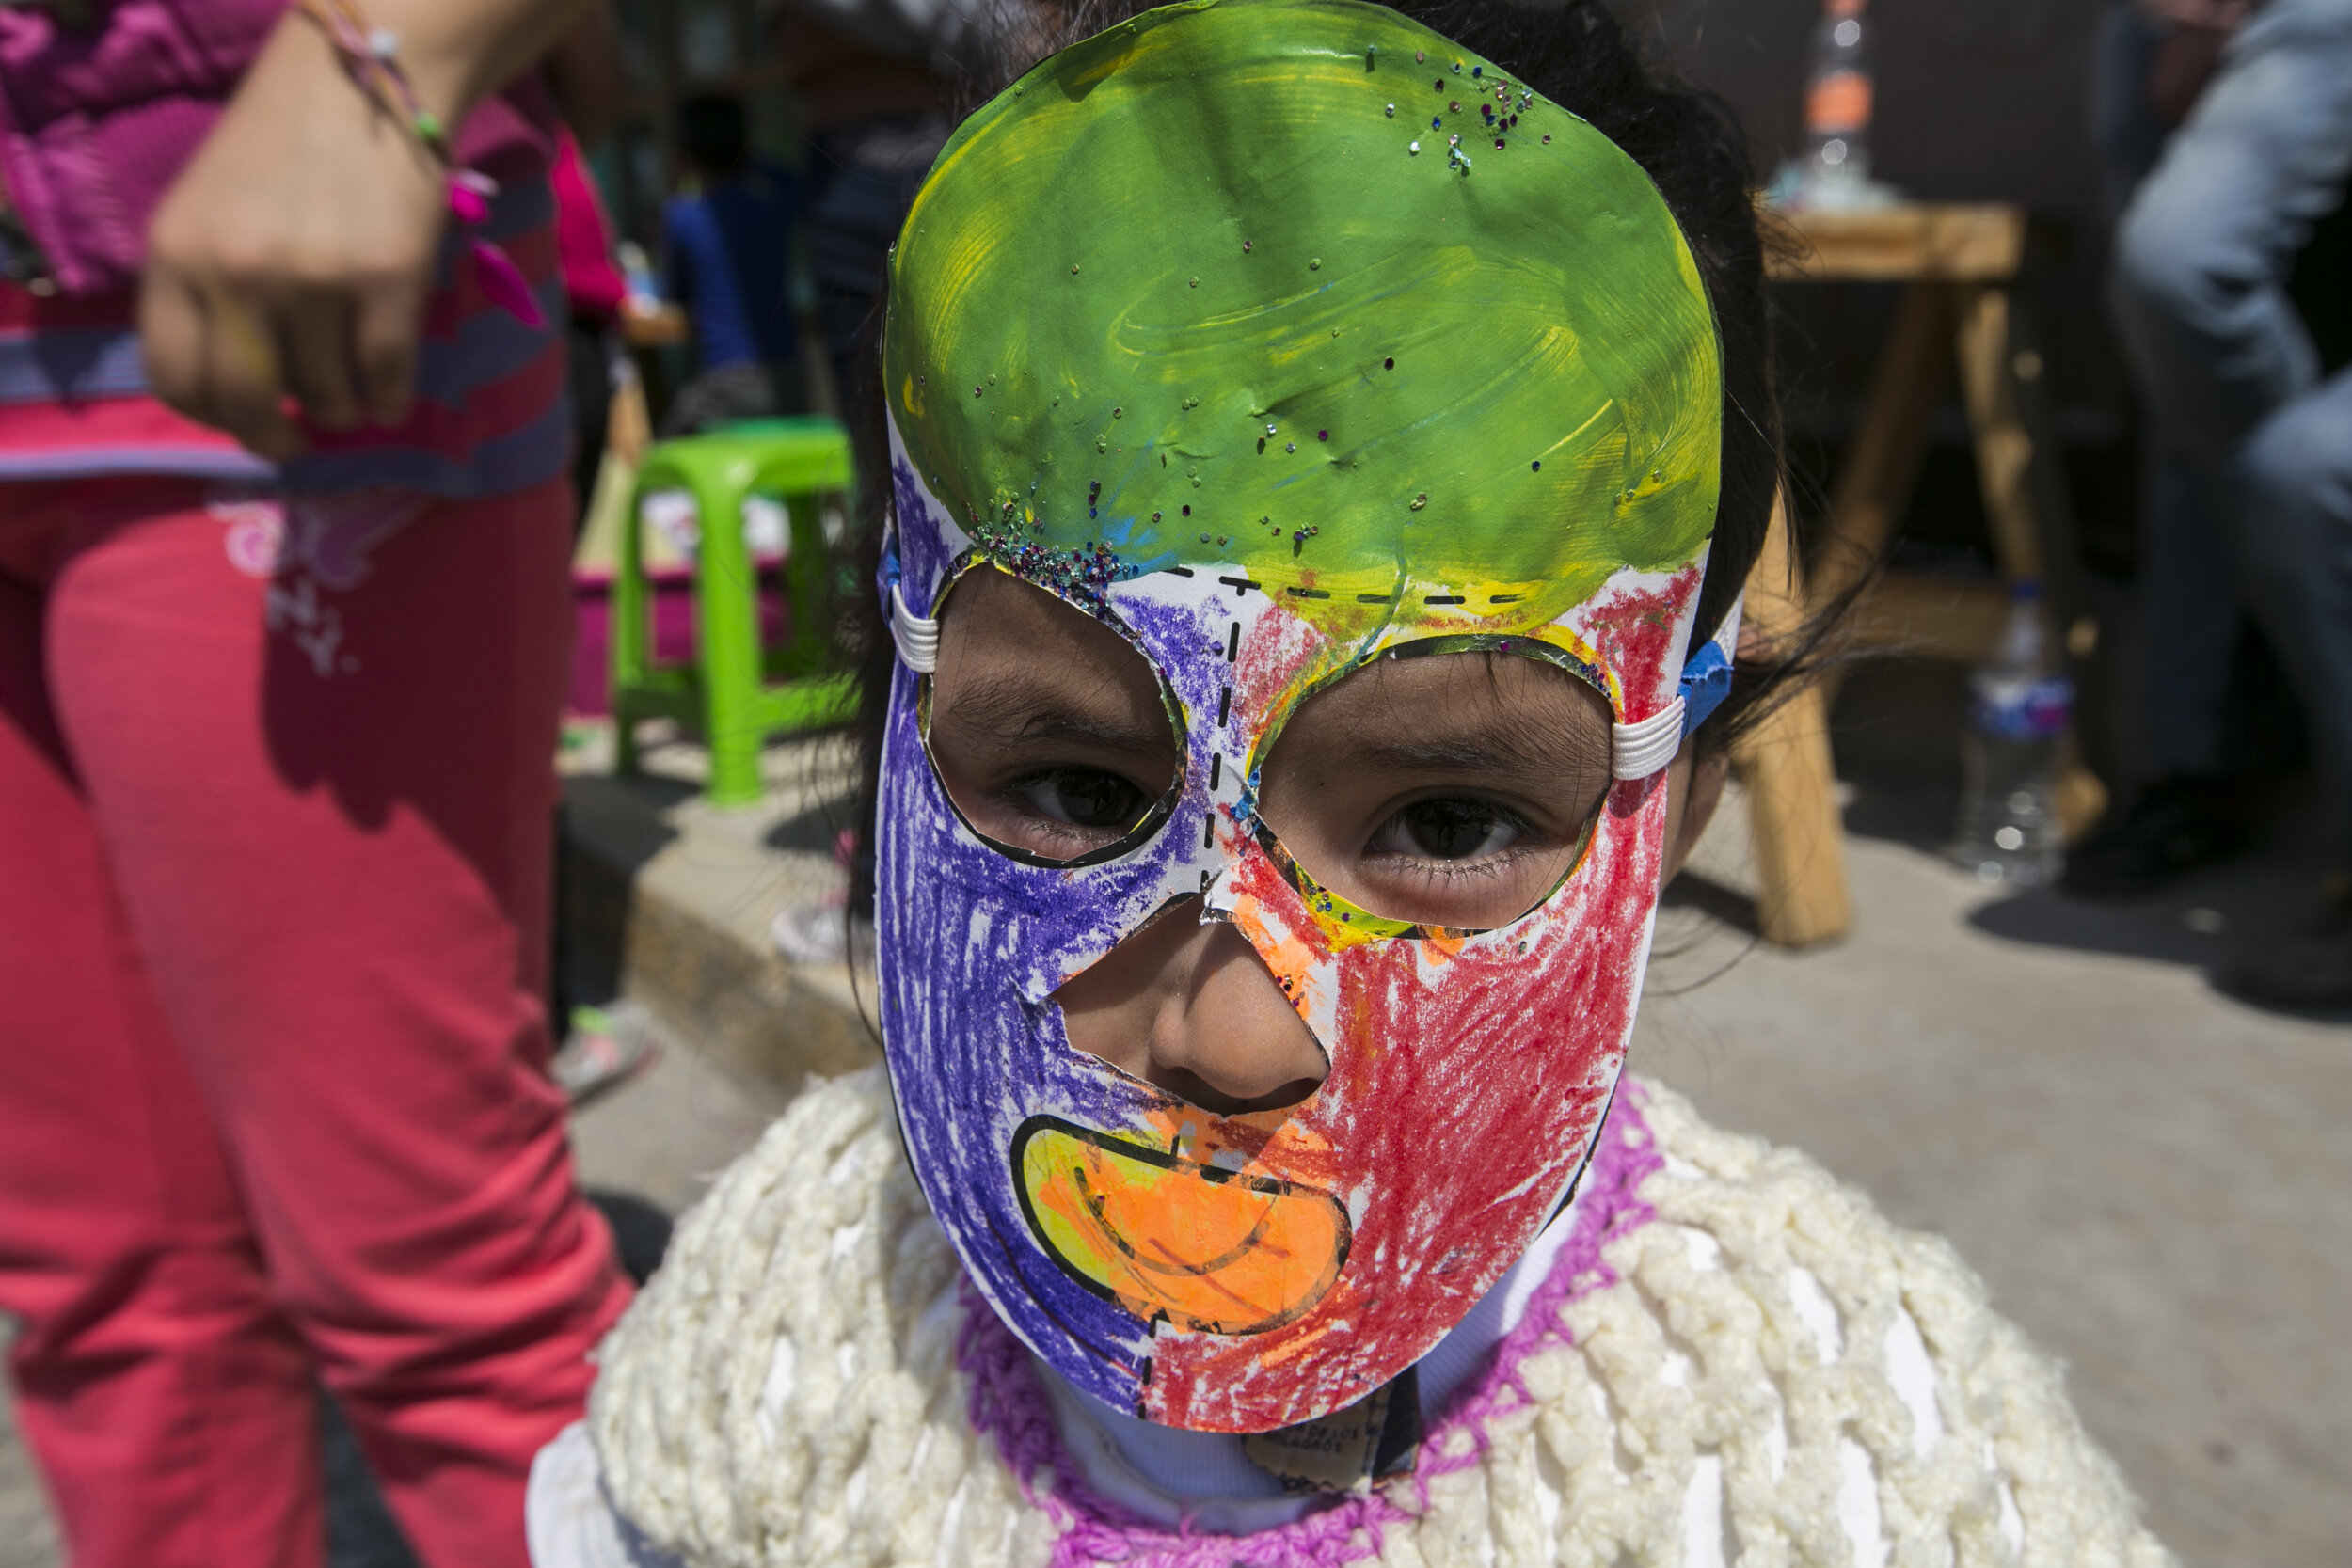  Access to high quality public and play spaces is one of the greatest challenges faced by children in Mexico City. Considering the rapid development of transportation infrastructure alongwith the uneven distribution of resources, violence, and crime,